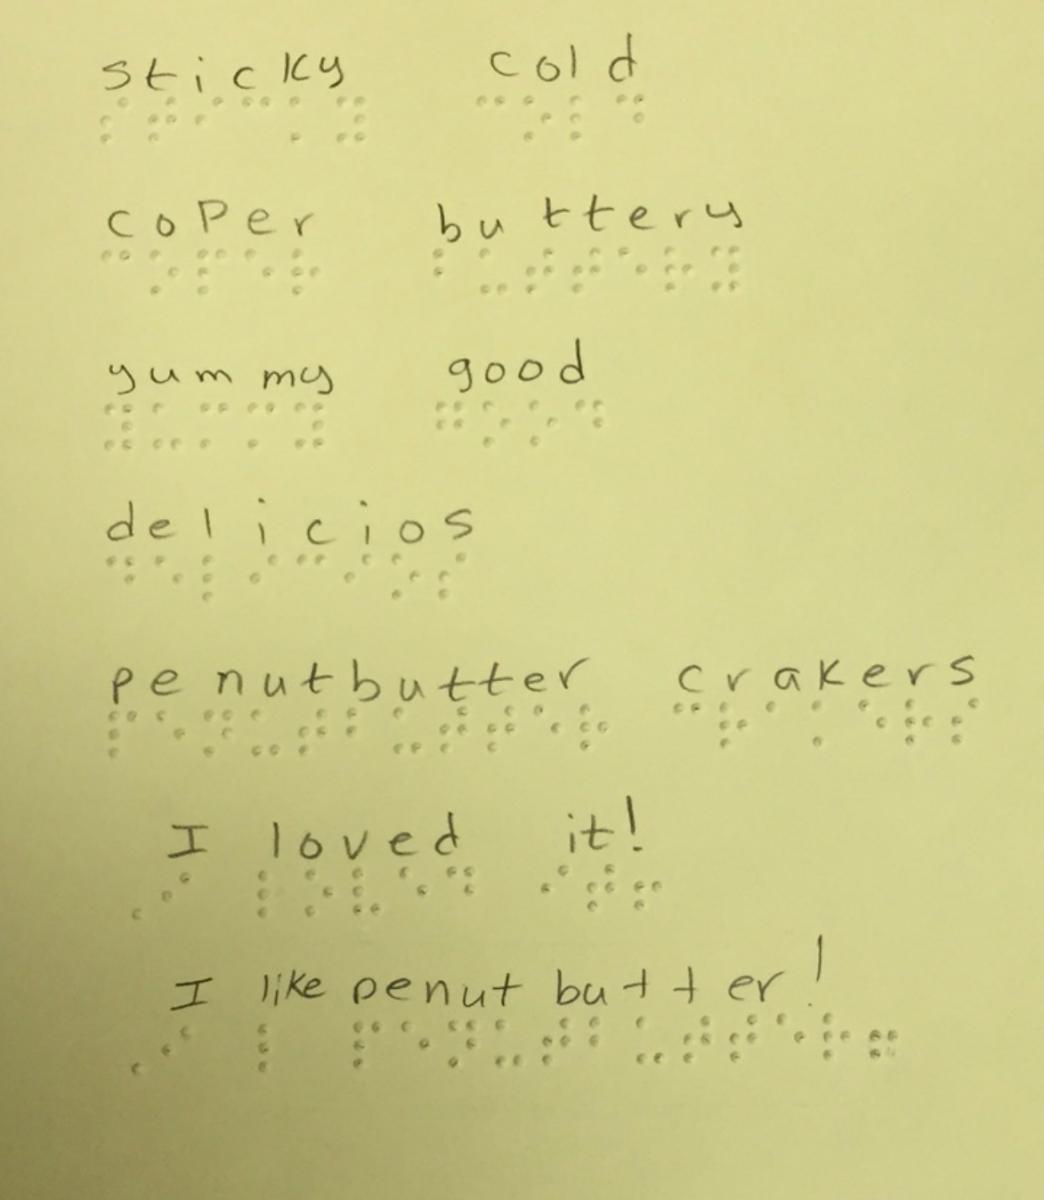 Braille writing about peanut butter